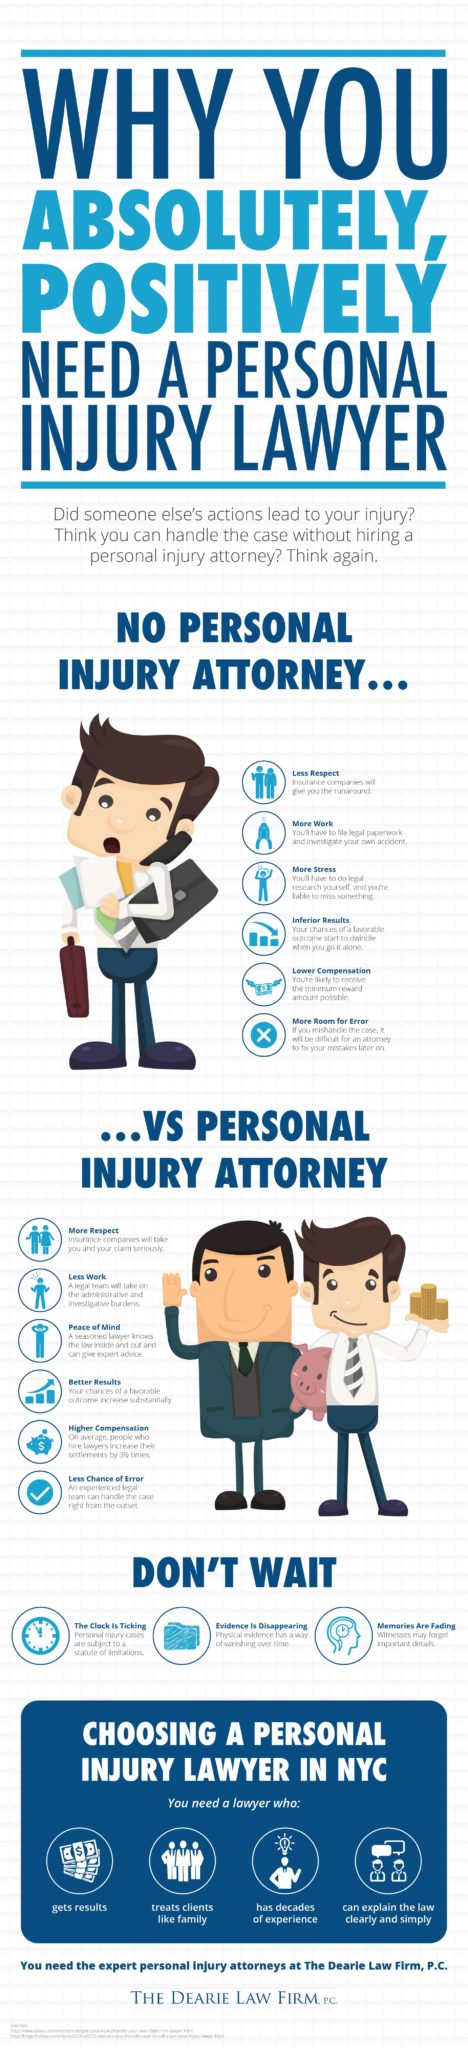 Why You Need a Personal Injury Lawyer Infographic